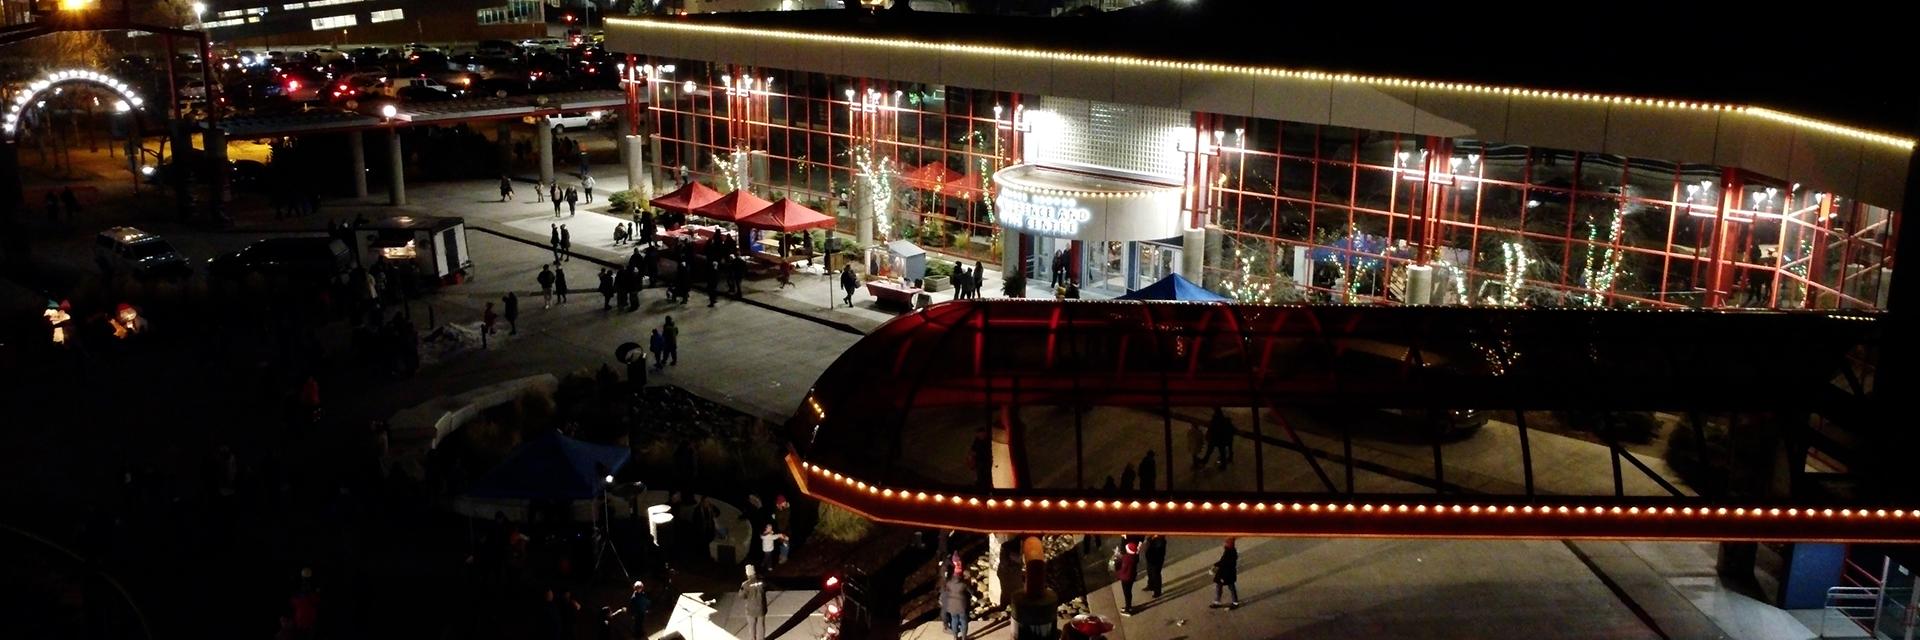 Aerial view of Canada Games Plaza in at night, with crowd and holiday lights.